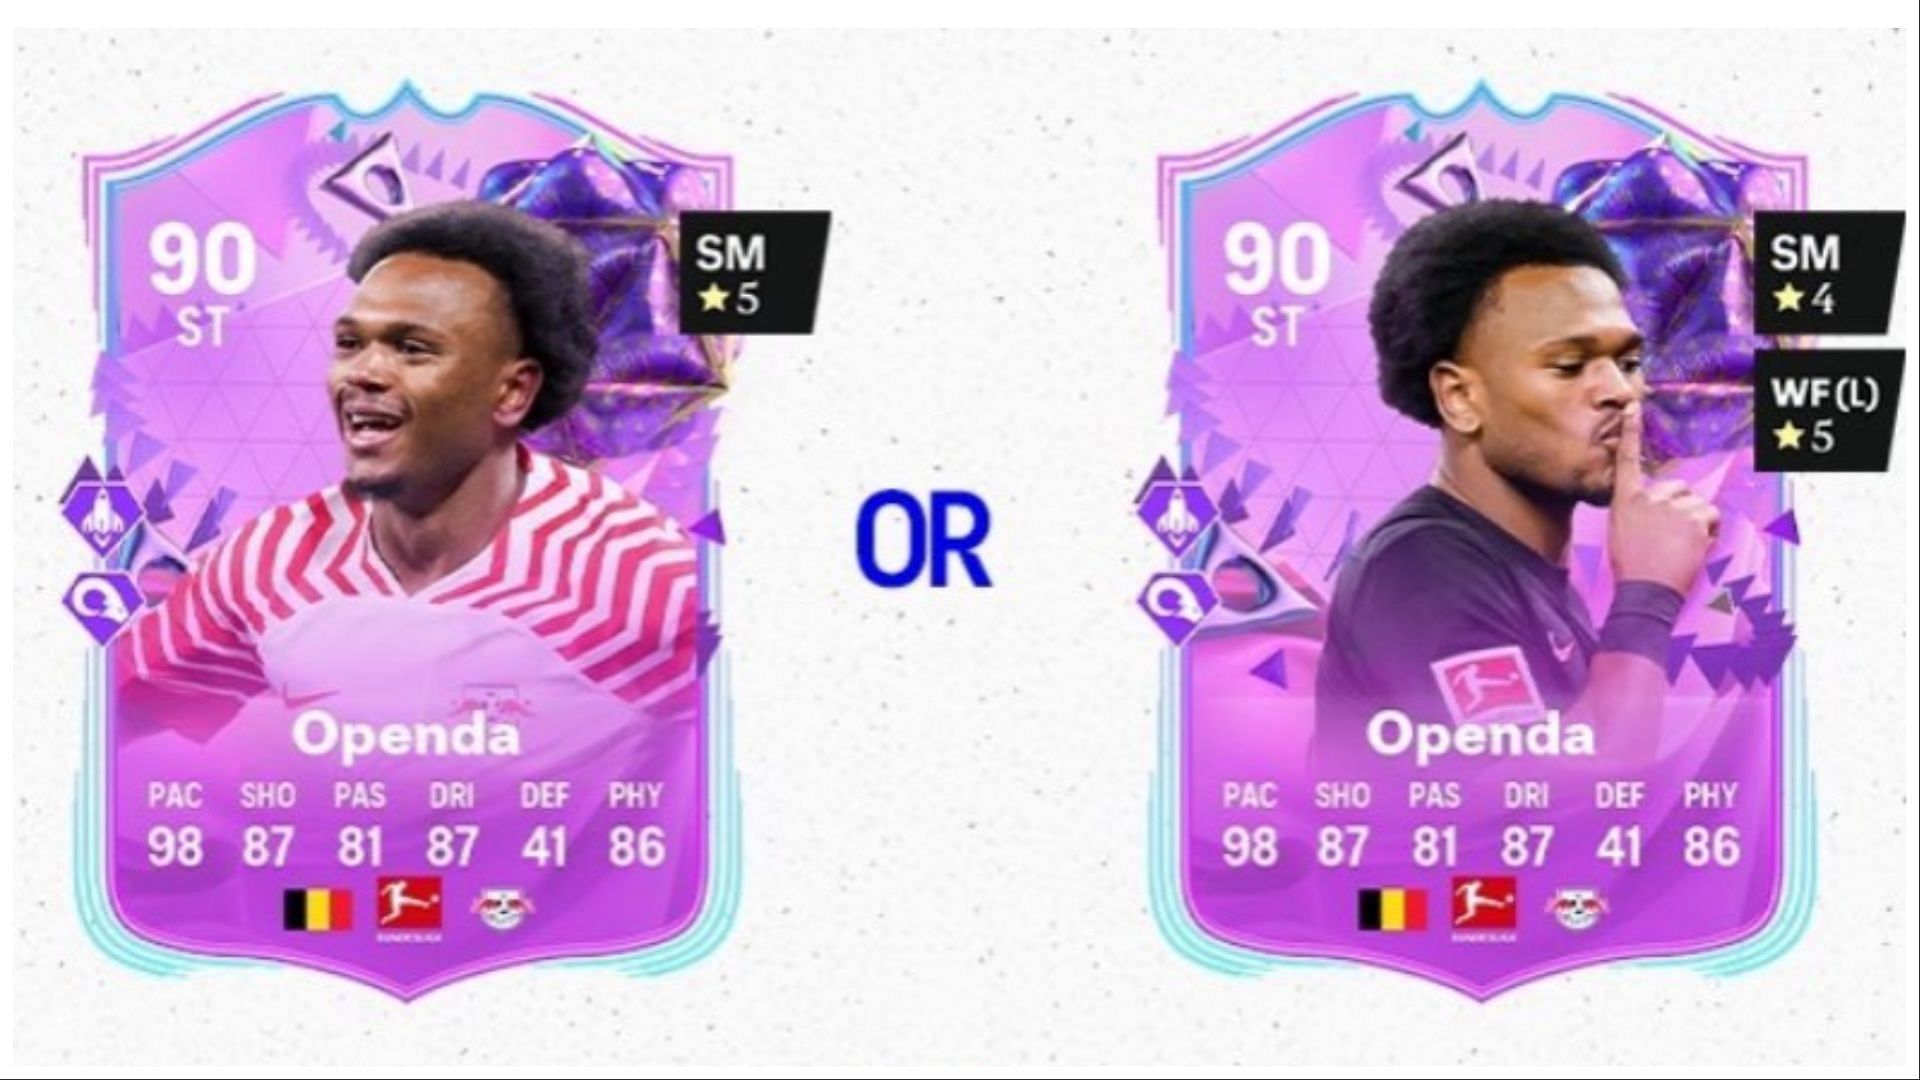 The EA FC 24 Lois Openda Ultimate Birthday SBCs are now live